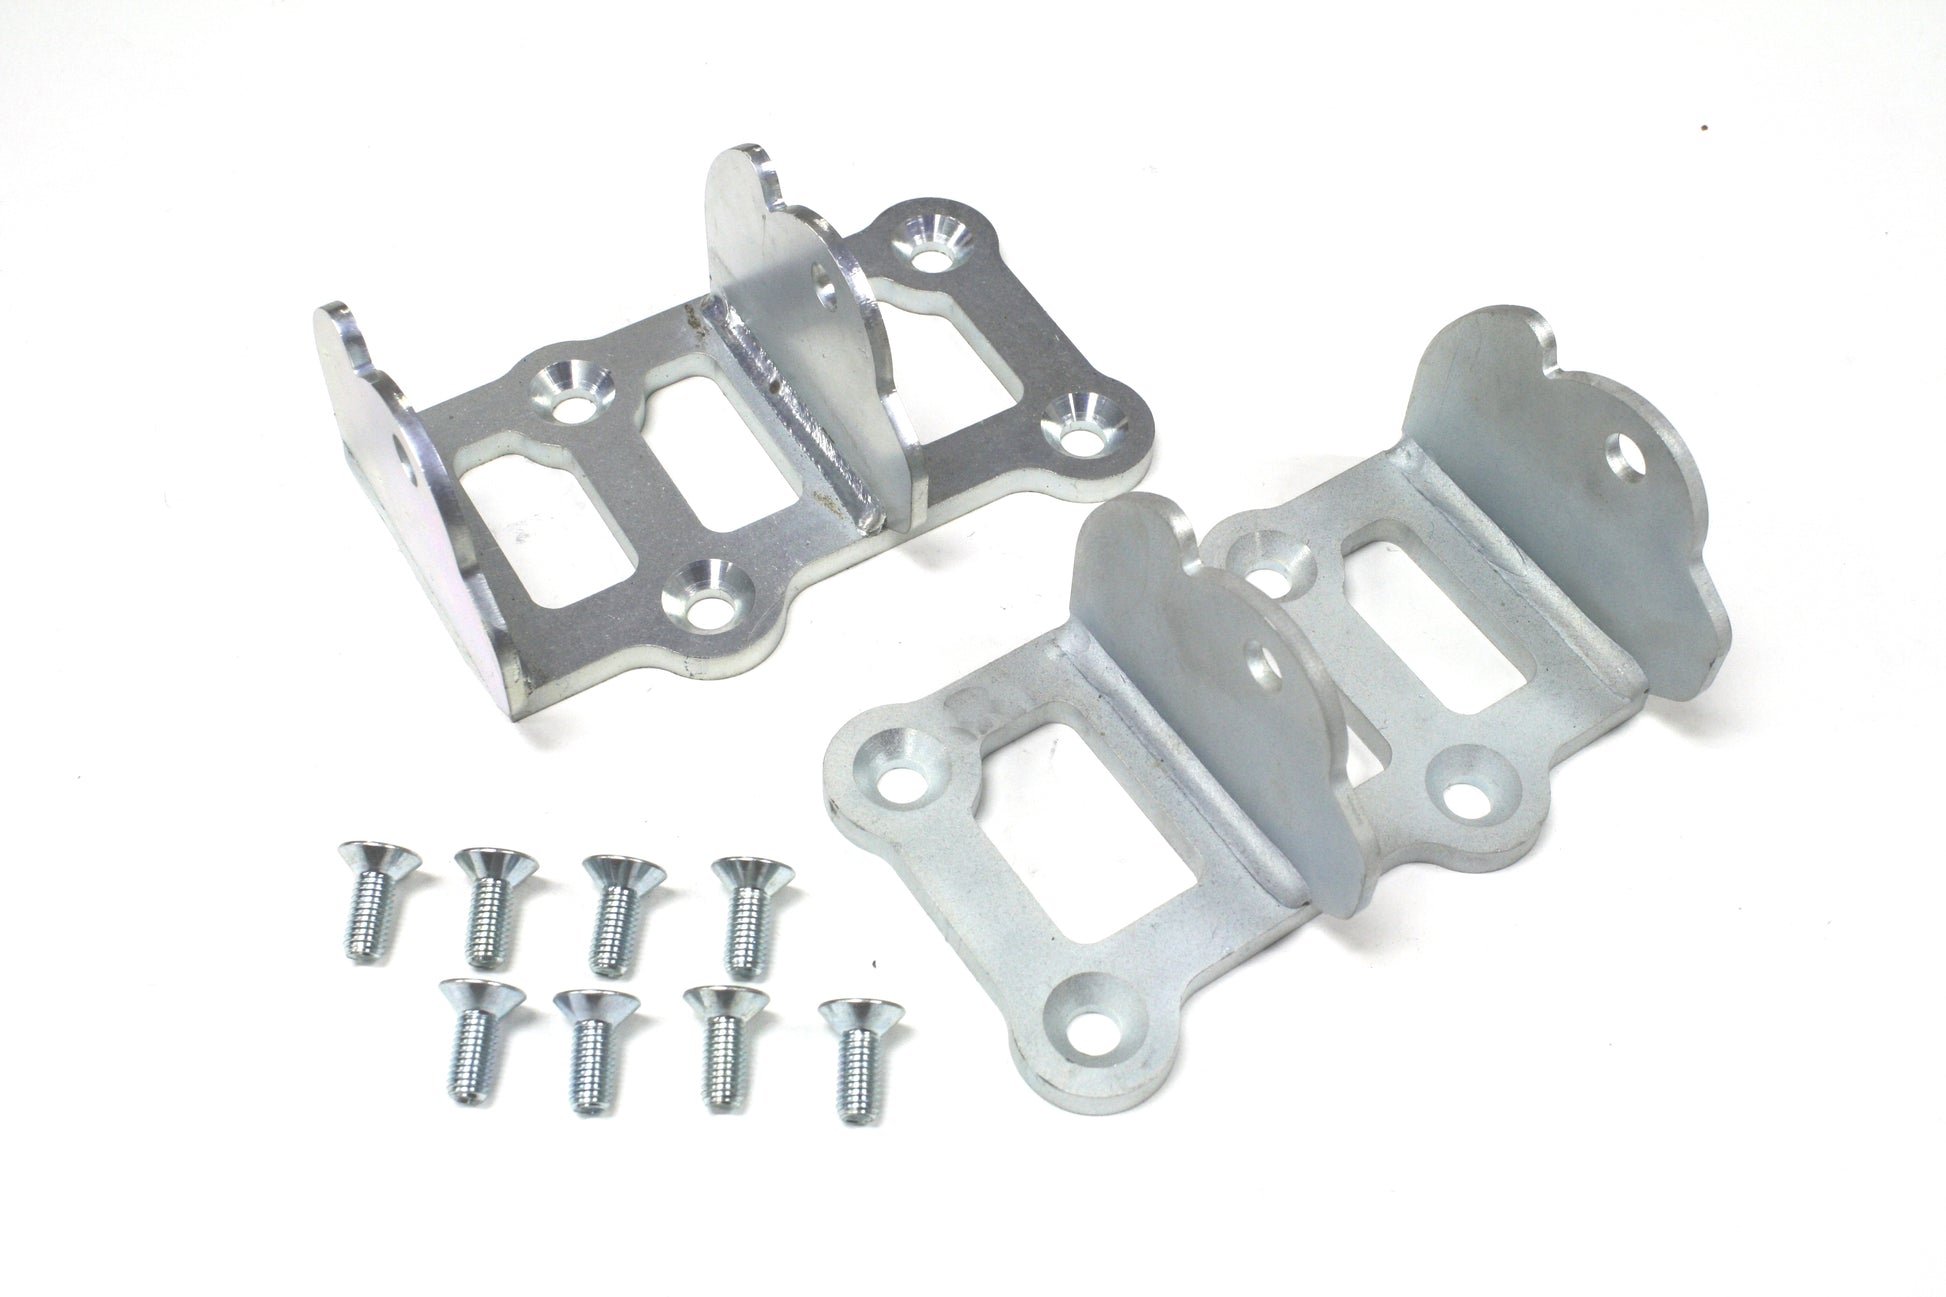 Doug's Headers SK101 Motor Mount Adapter Plate Kit for LS1/LS6 GM engines into 73-87 C10 Chevy Trucks